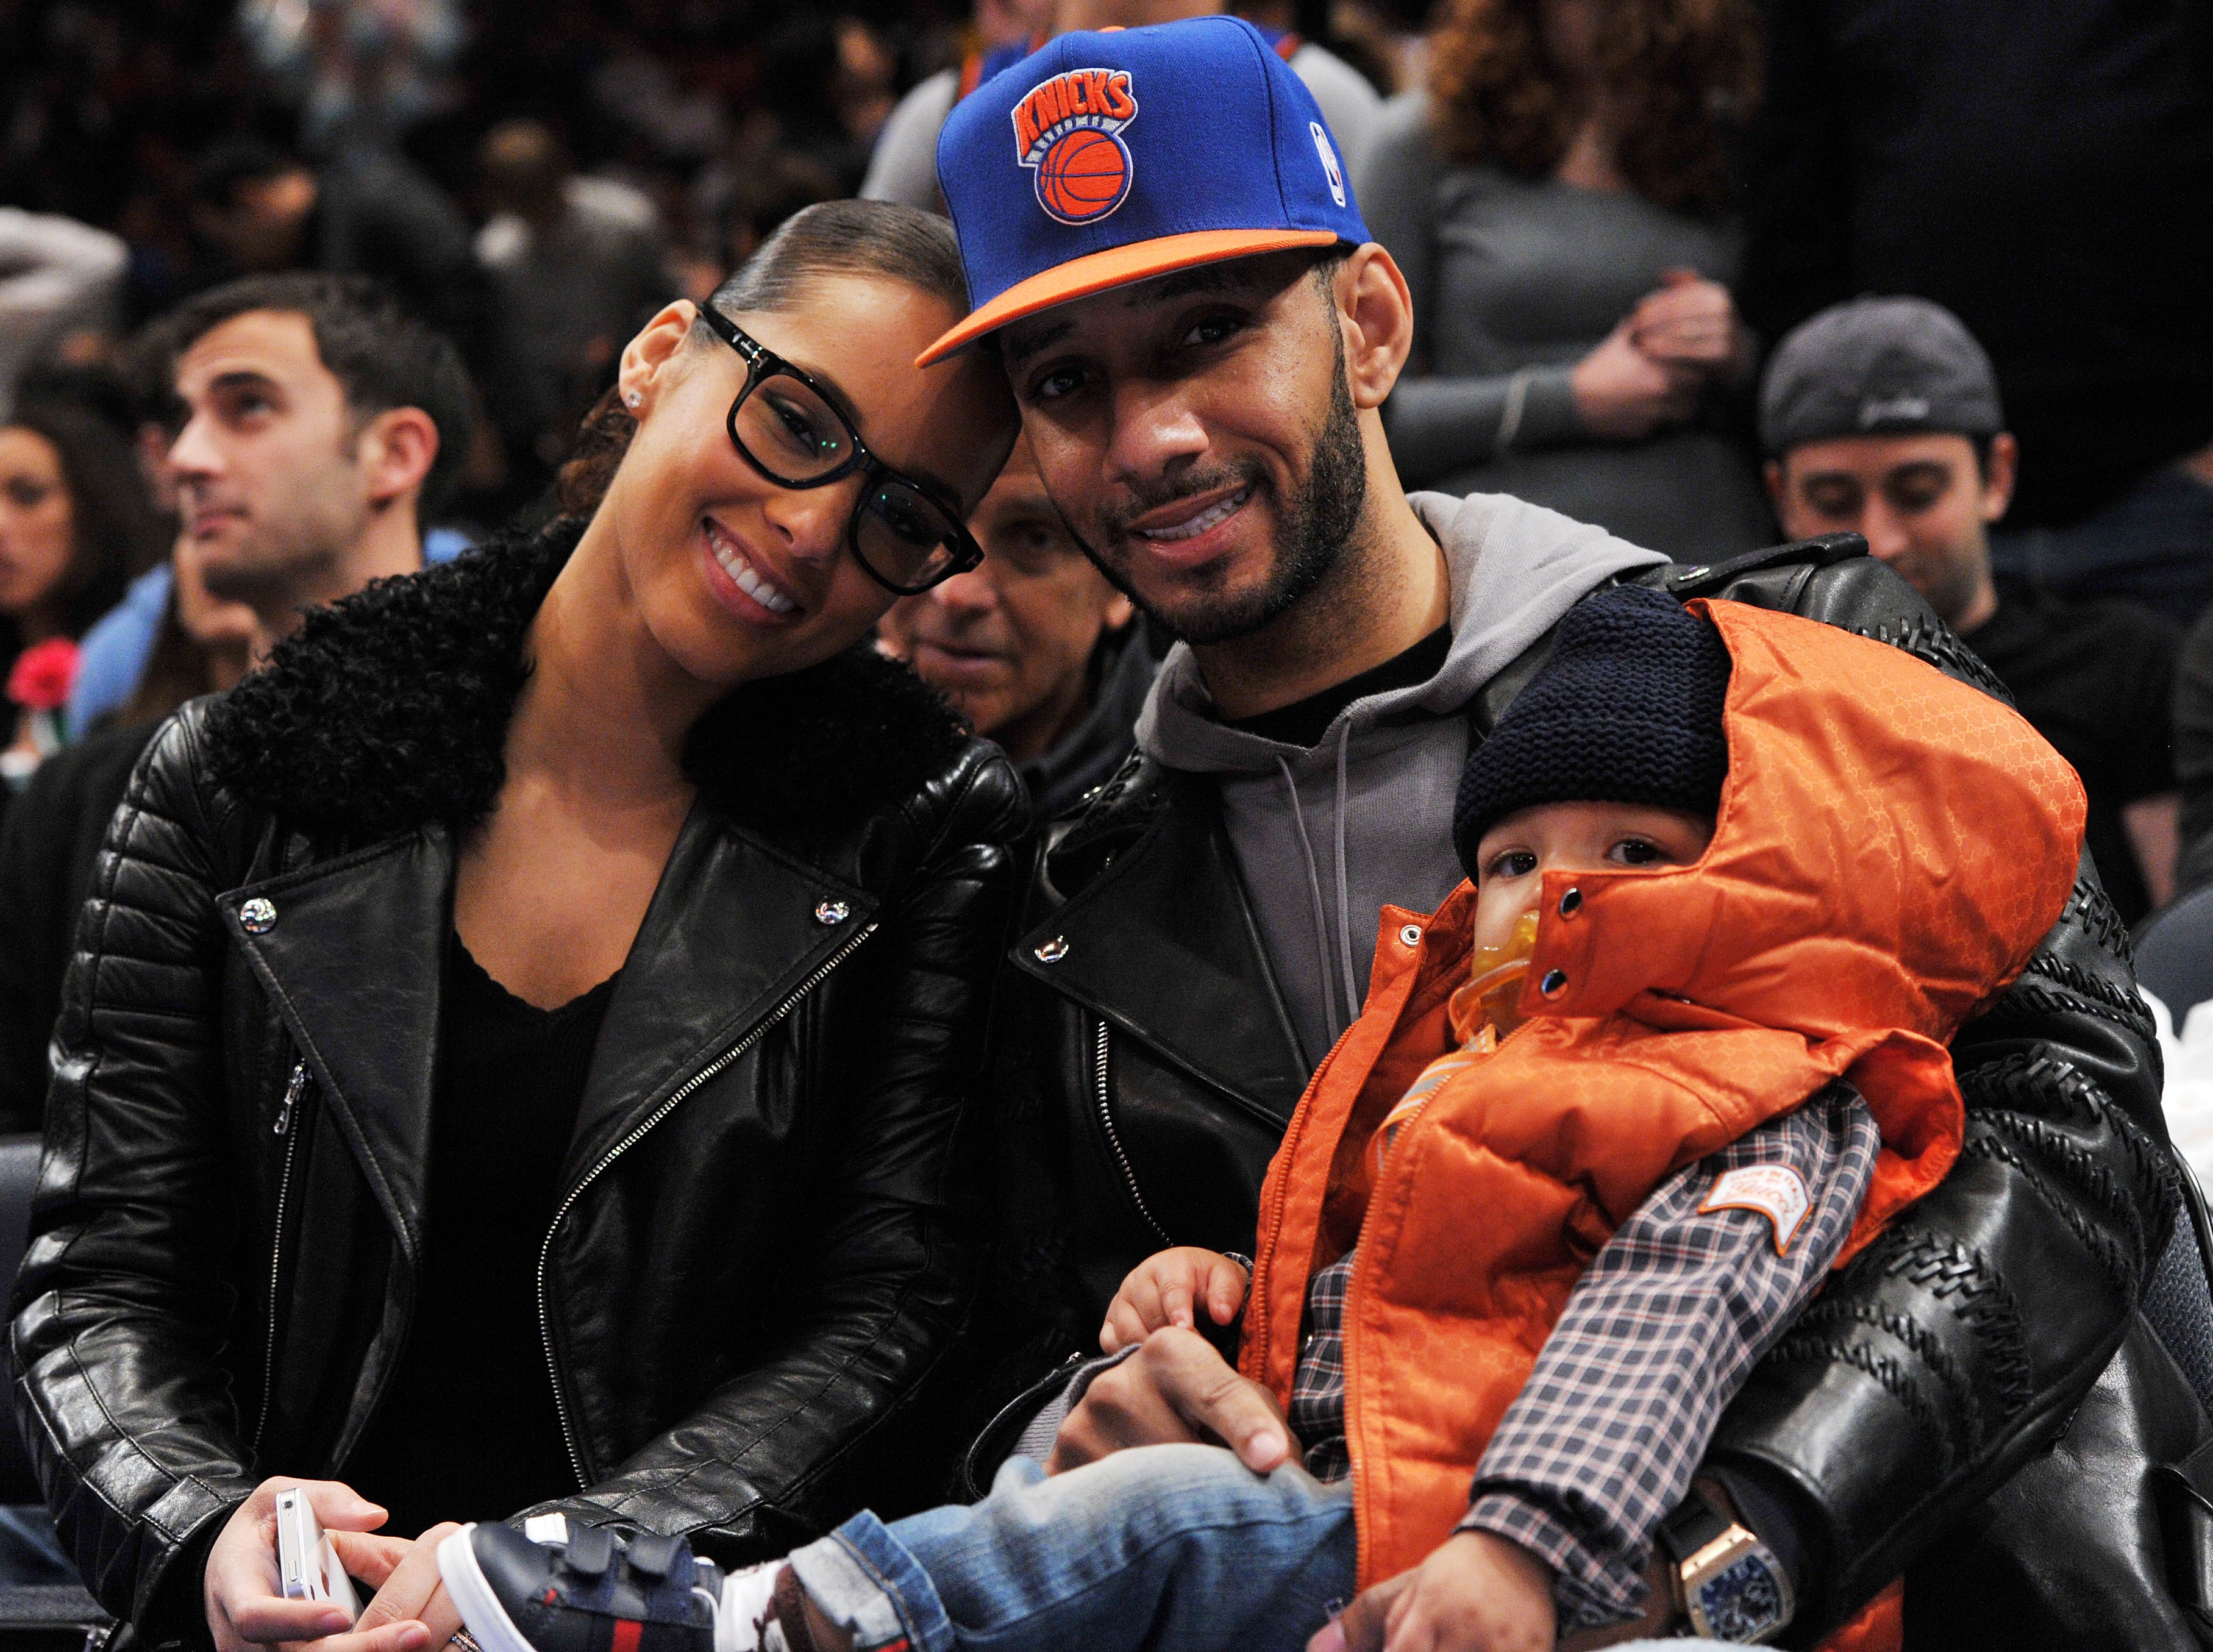 17 Celebrity Couples Looking Super Cute While Courtside For NBA Date Nights
